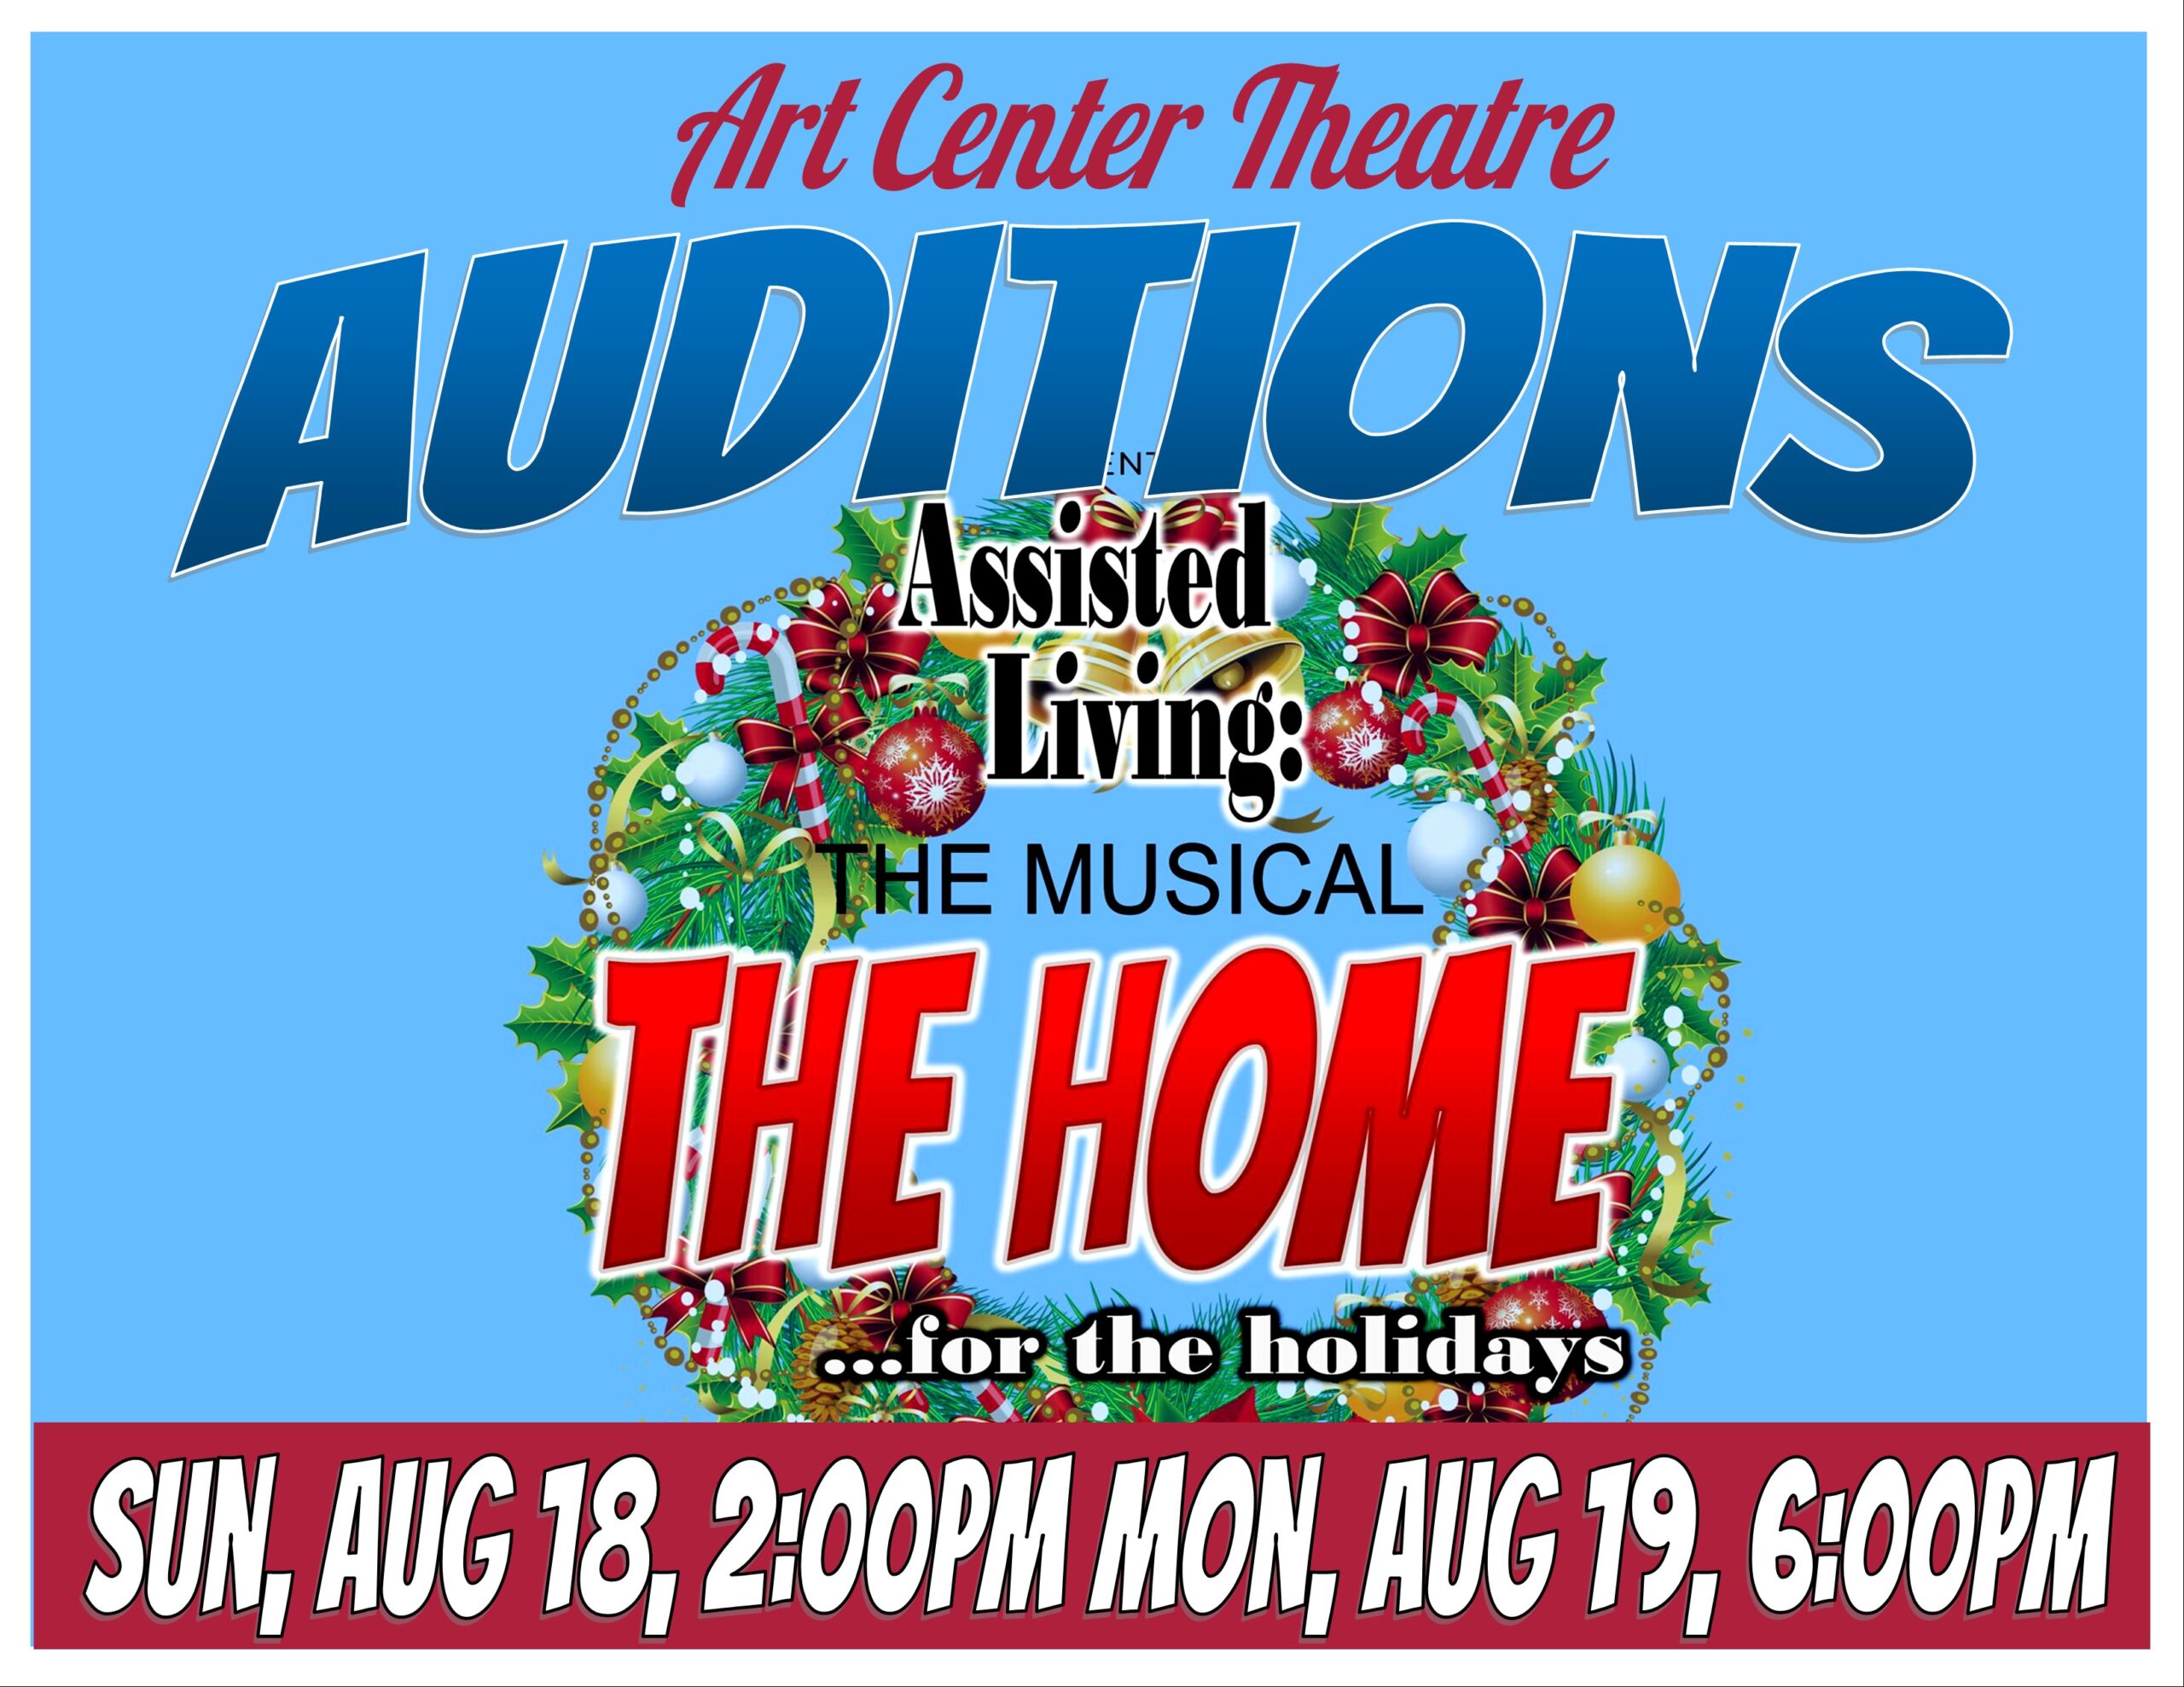 Audition Notice: MUSICAL Assisted Living the HOME, Sun, Aug 18, @ 2:00 pm Mon, Aug 19, @ 6:00 pm